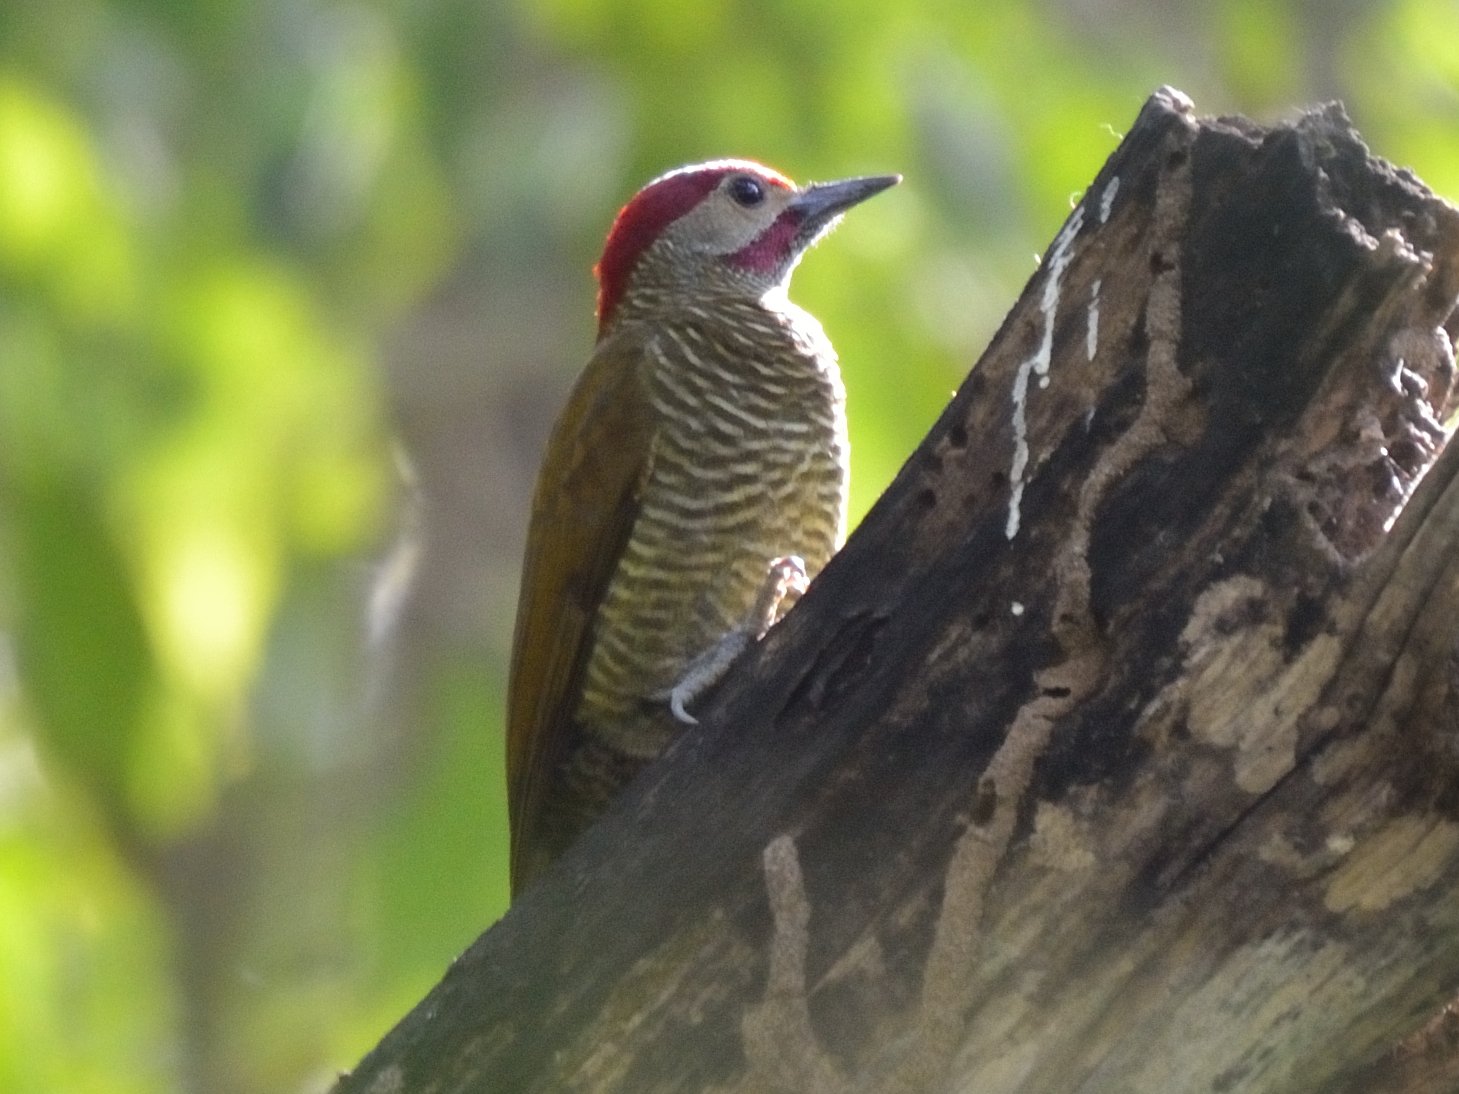 Click picture to see more Golden-olive Woodpeckers.